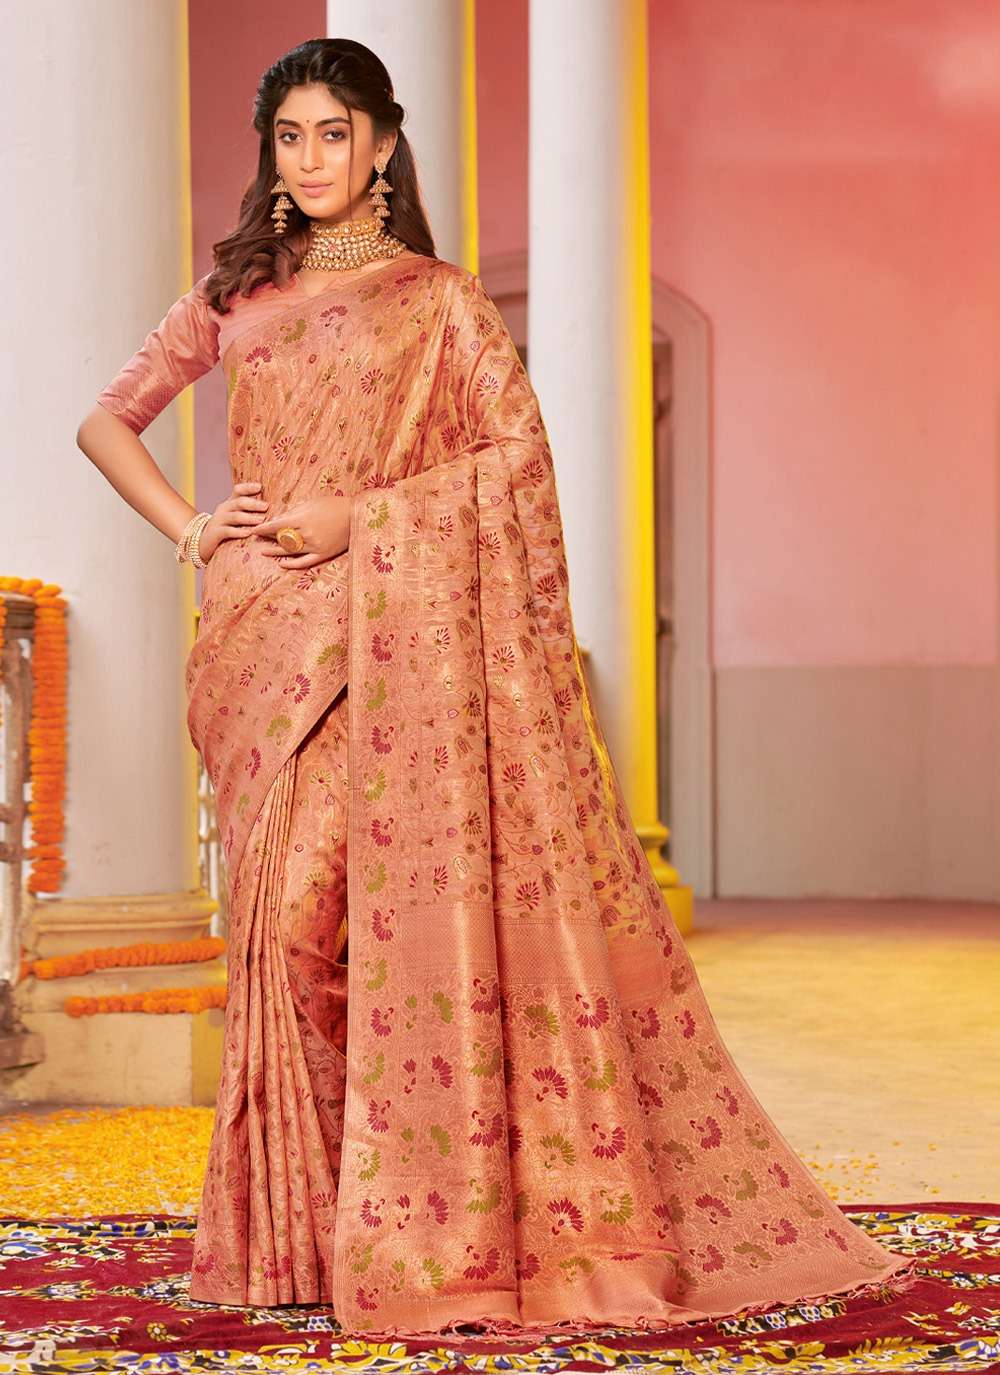 How to get to Surat Saree Sale in Delhi by Bus or Metro?